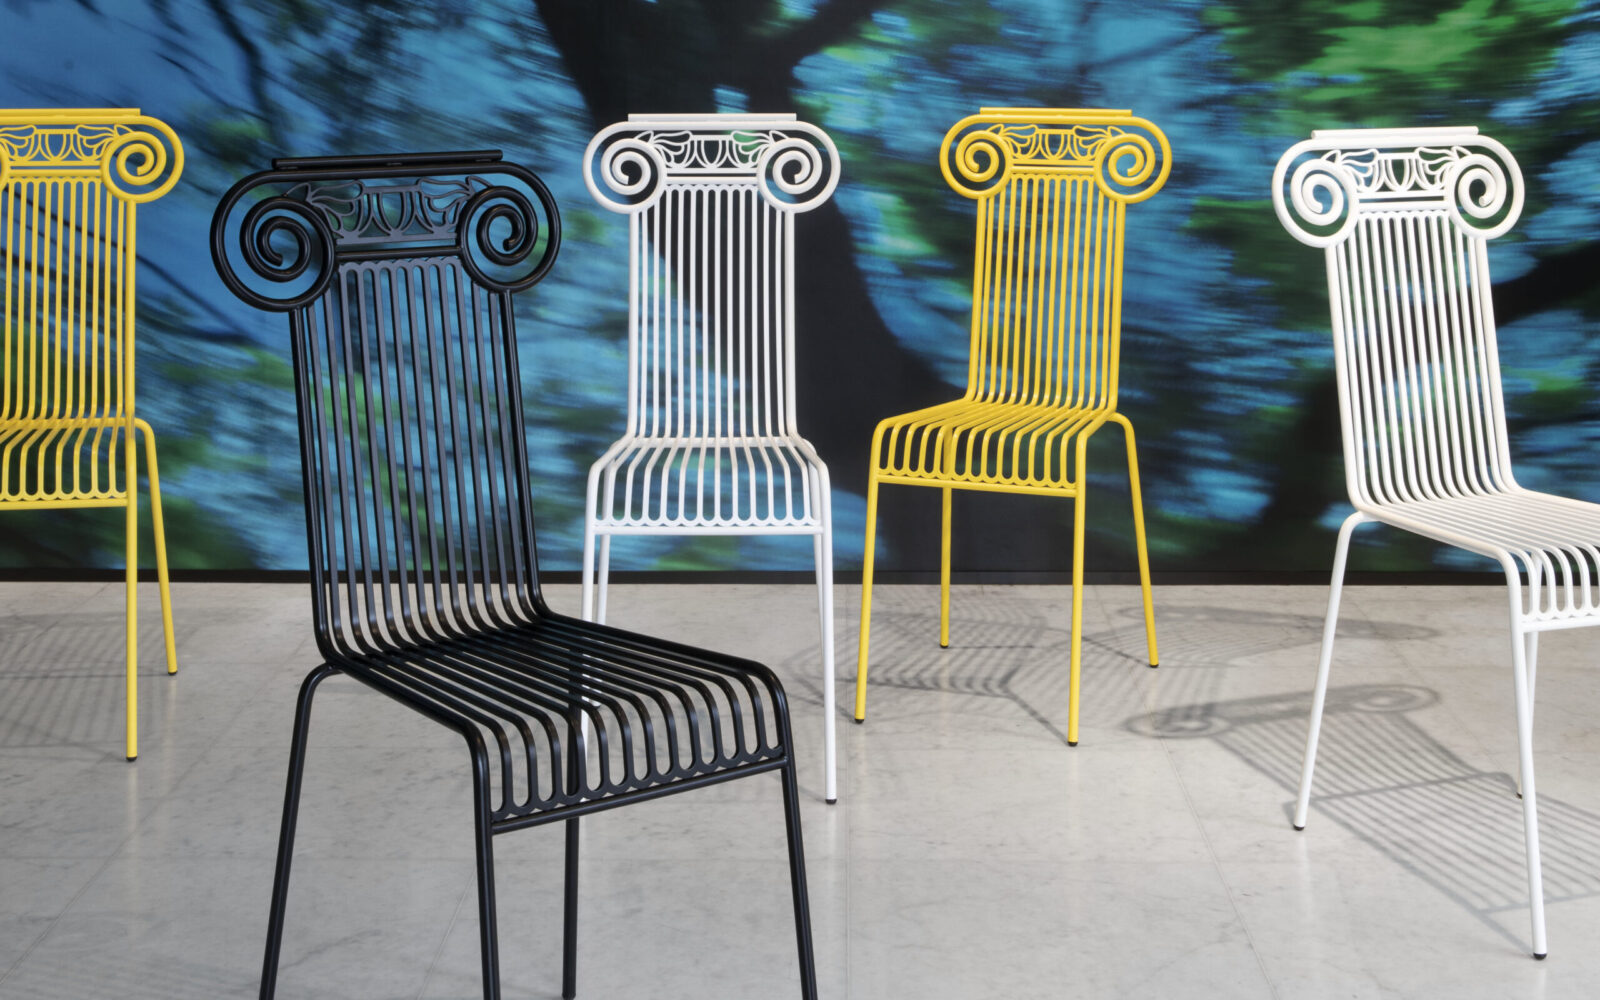 27 THE GARDEN OF POSSIBLE NATURES_CHAIRS CAPITELLUM @ FORNASETTI, MILAN_HR